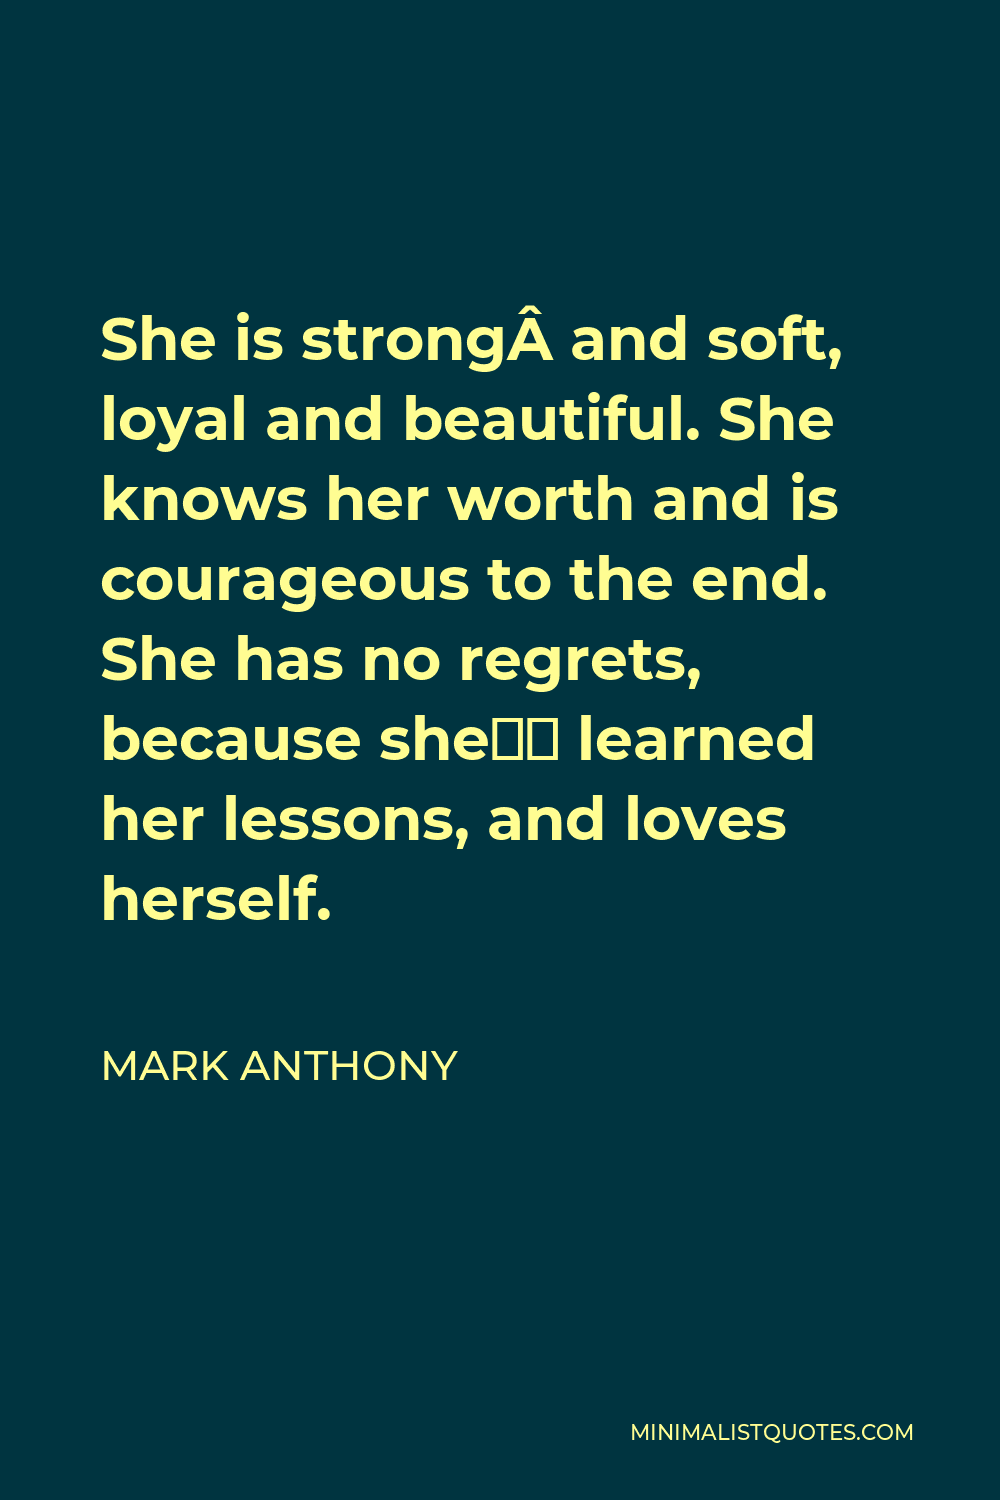 Mark Anthony Quote - She is strong and soft, loyal and beautiful. She knows her worth and is courageous to the end. She has no regrets, because she’s learned her lessons, and loves herself.